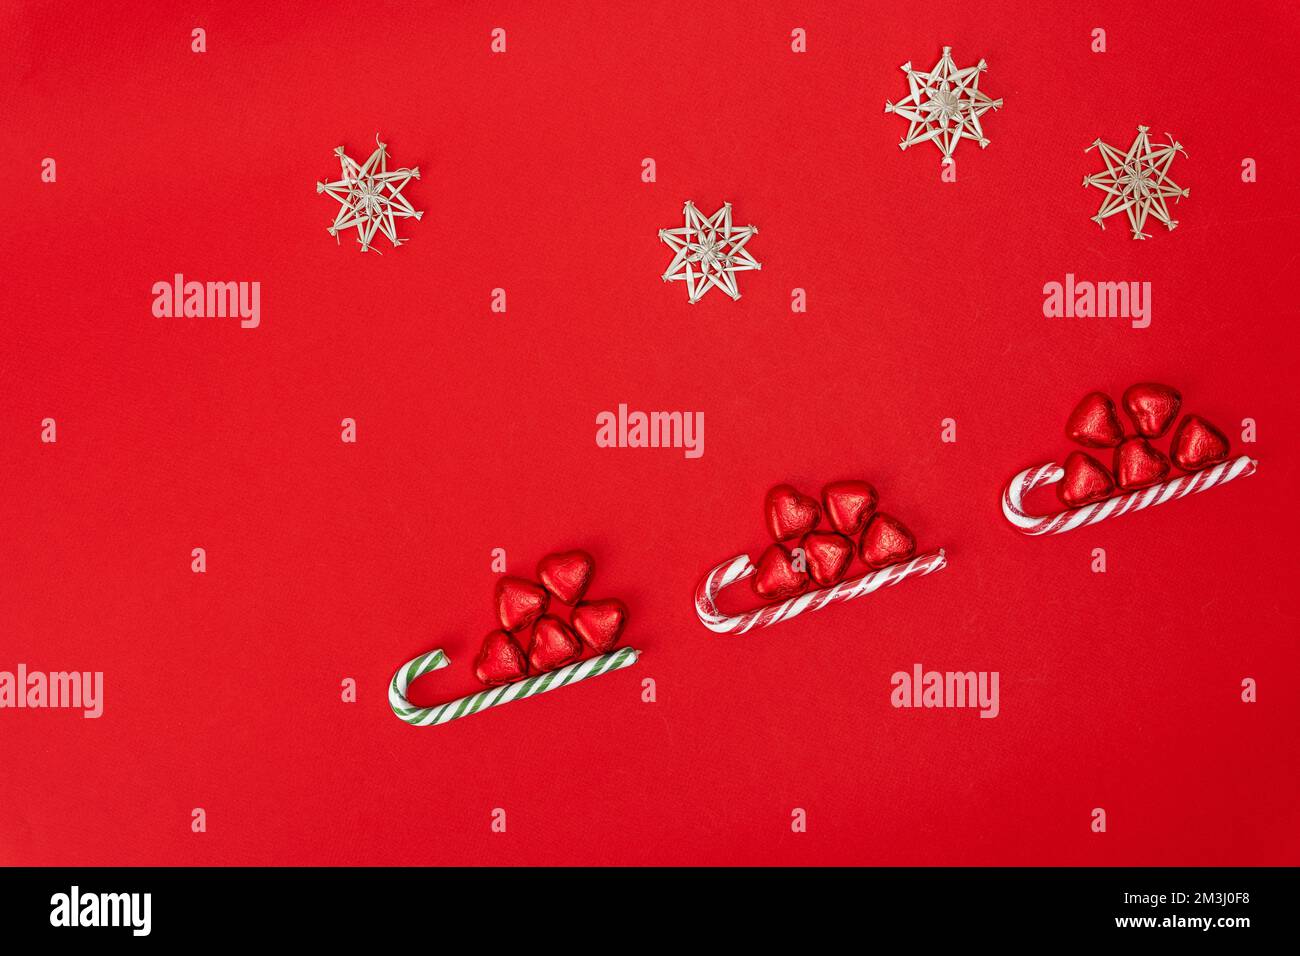 Christmas background with a sled, candy and a caramel cane Stock Photo